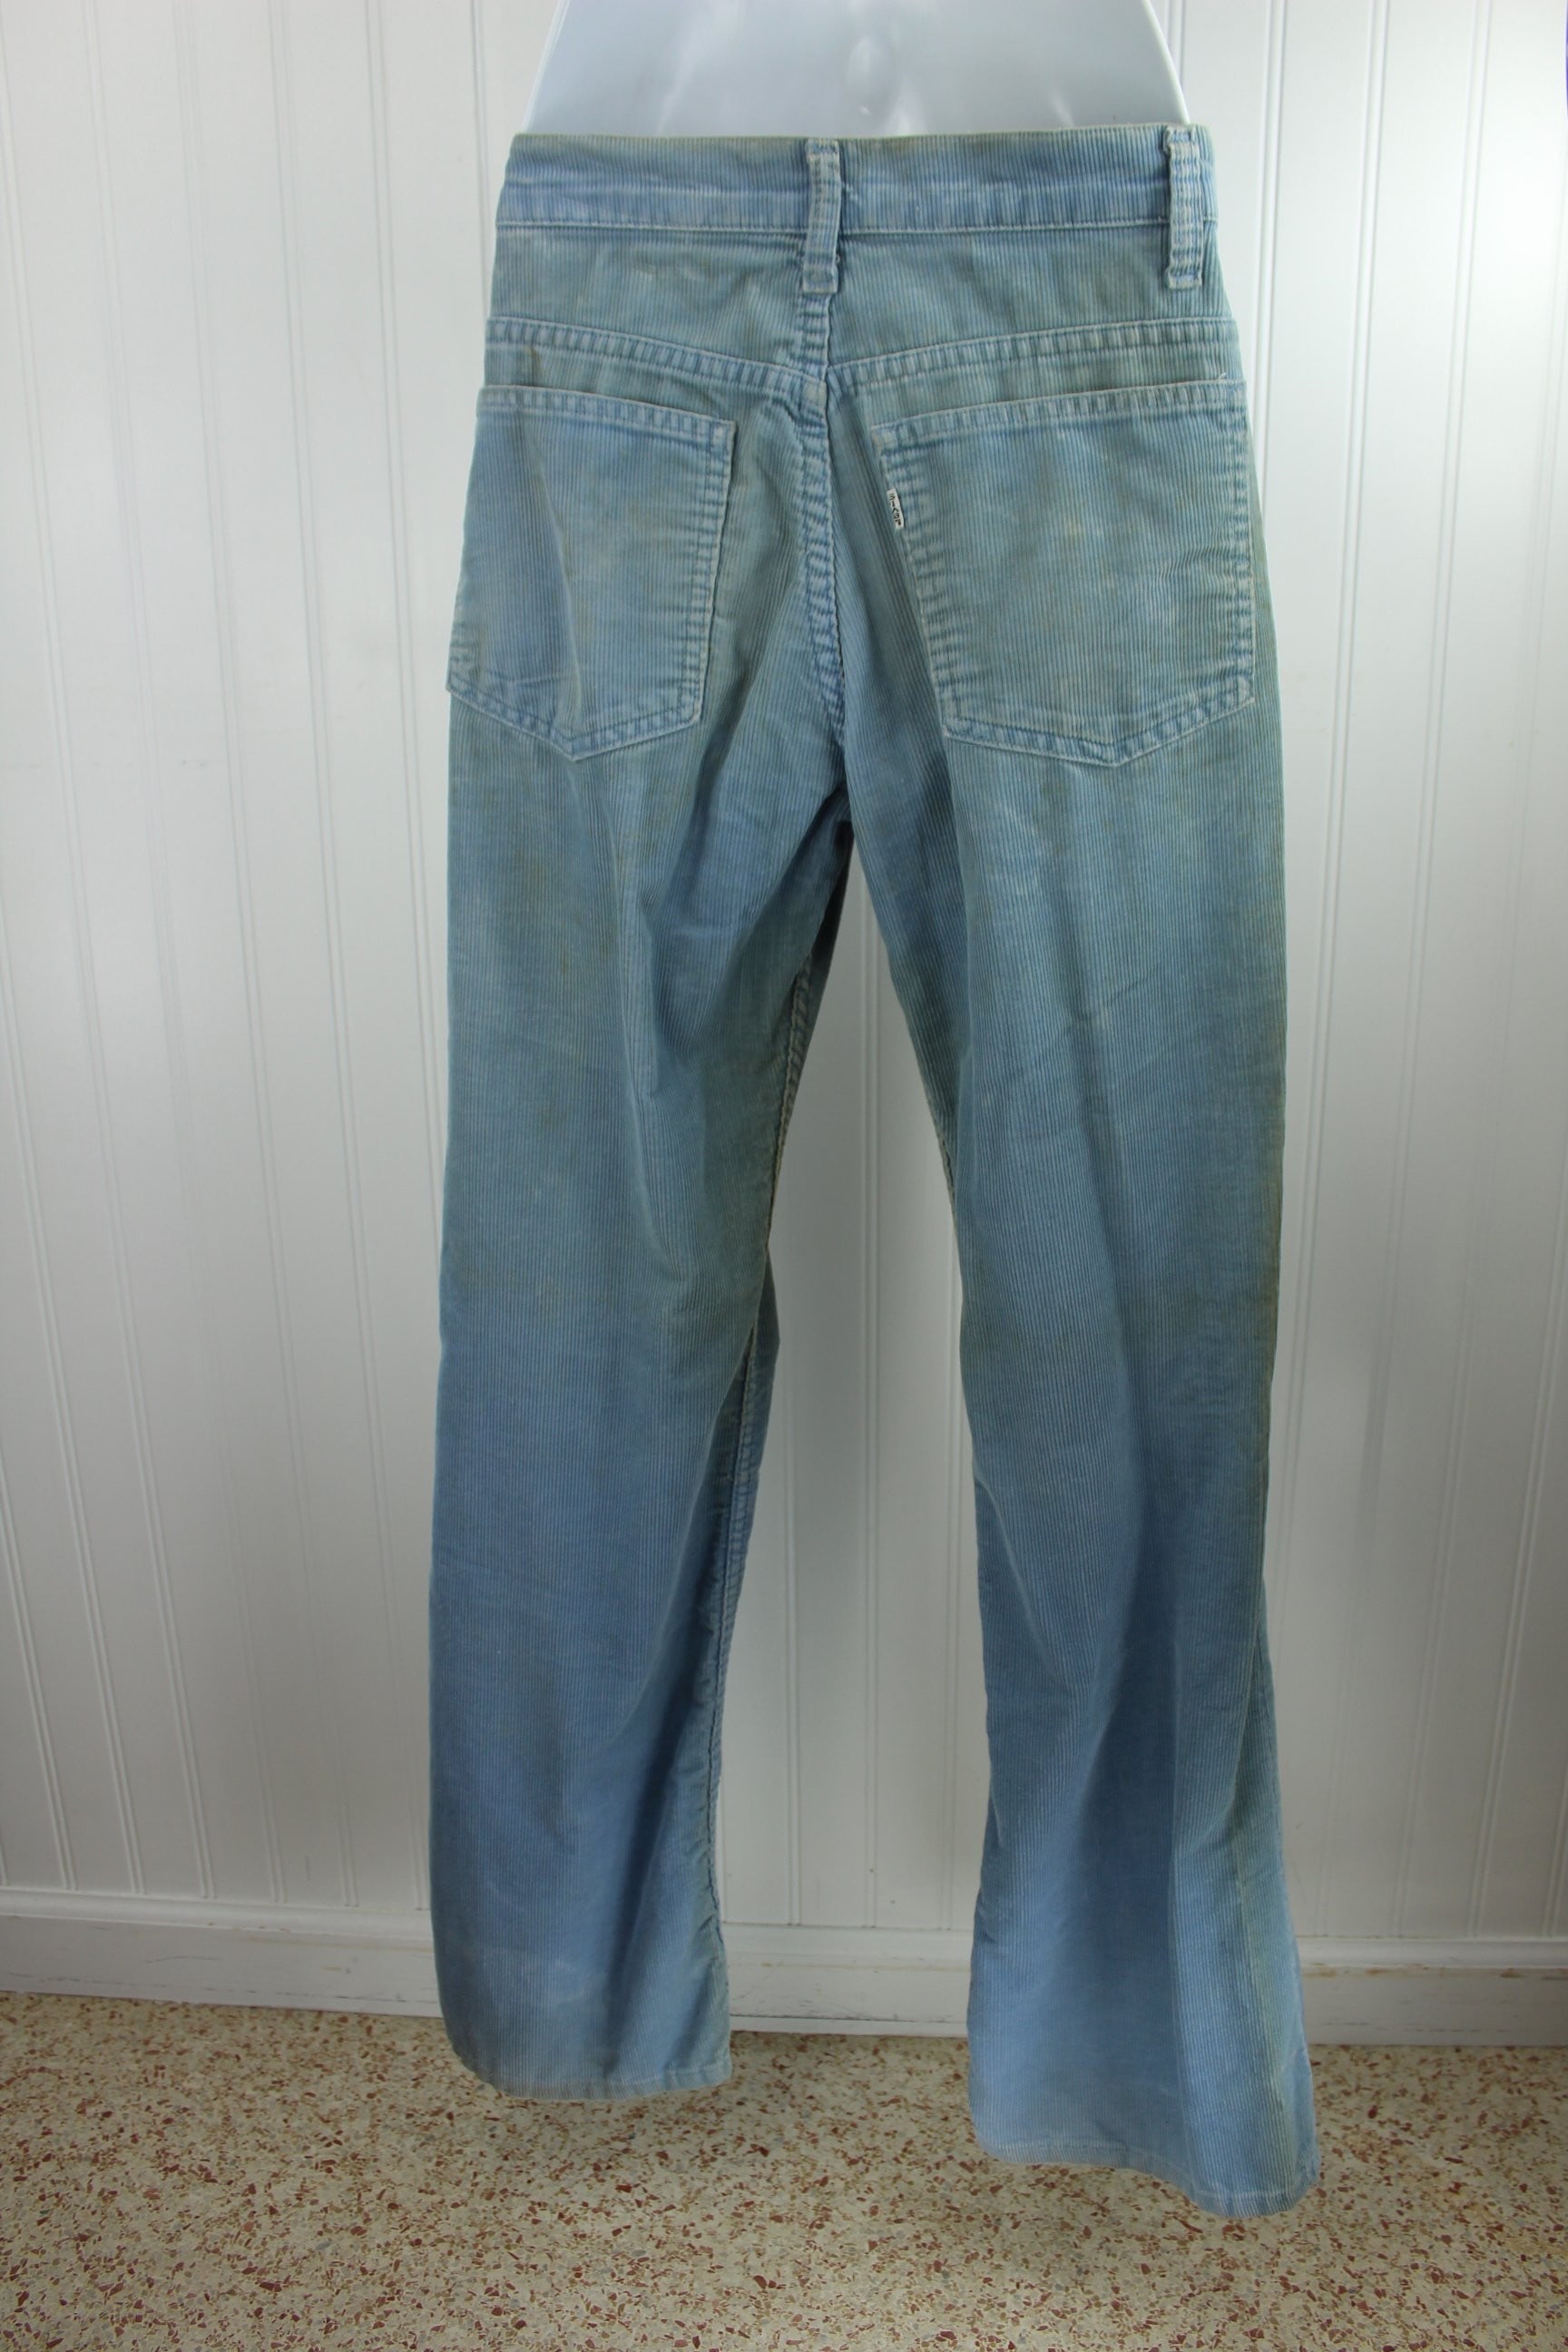 Vintage Levi's Skate Boarder Distressed Blue Cord Jeans 517 - Early 1990s - White Tab grunge